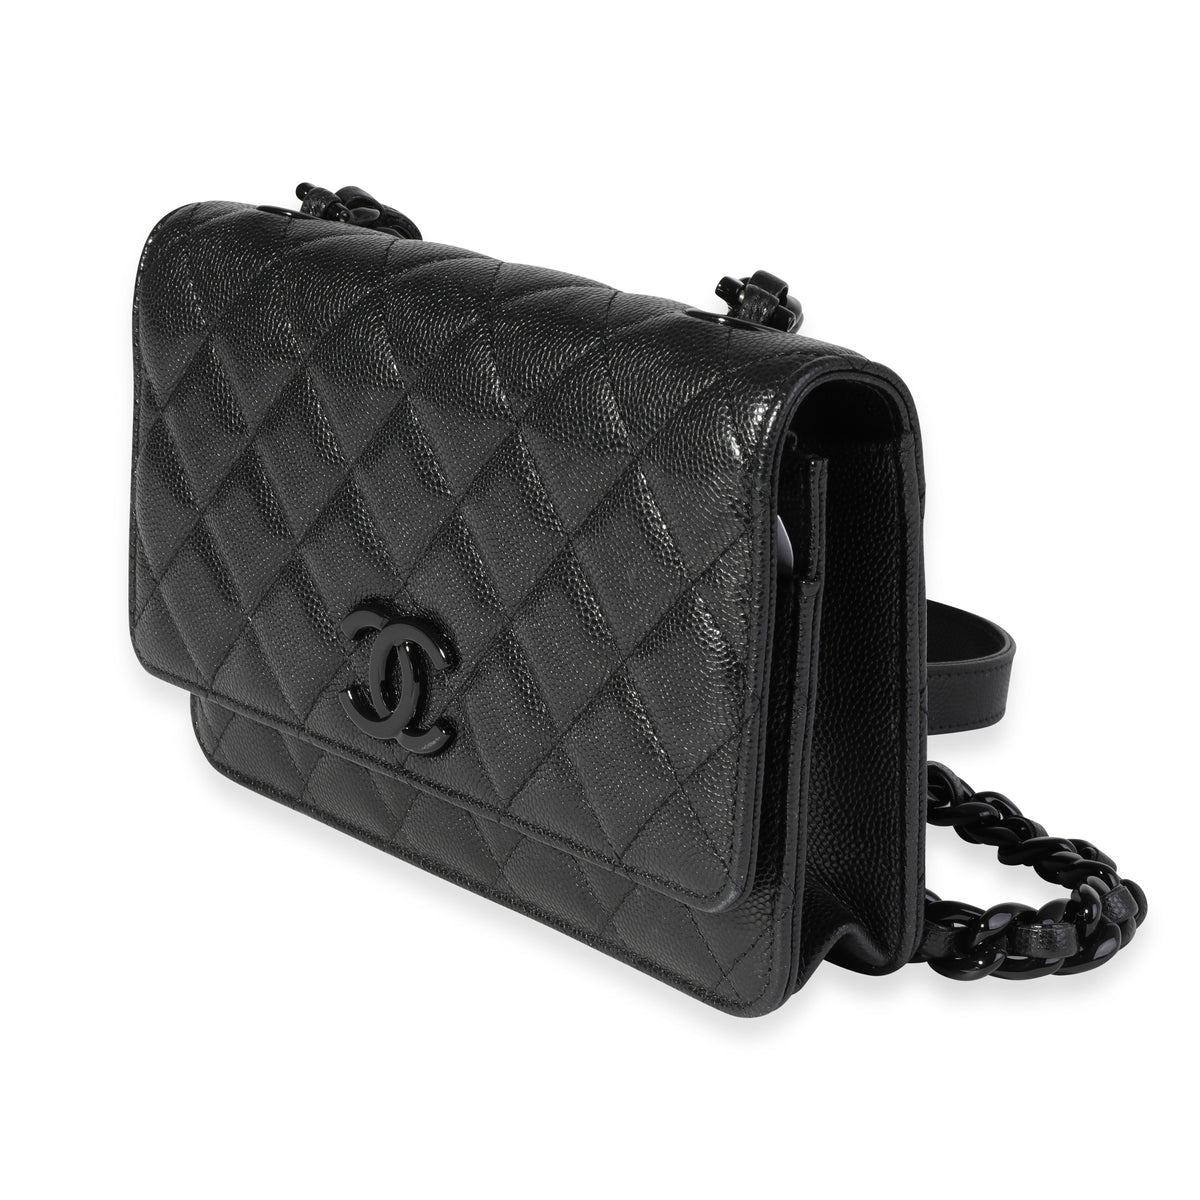 Chanel My Everything Wallet on Chain